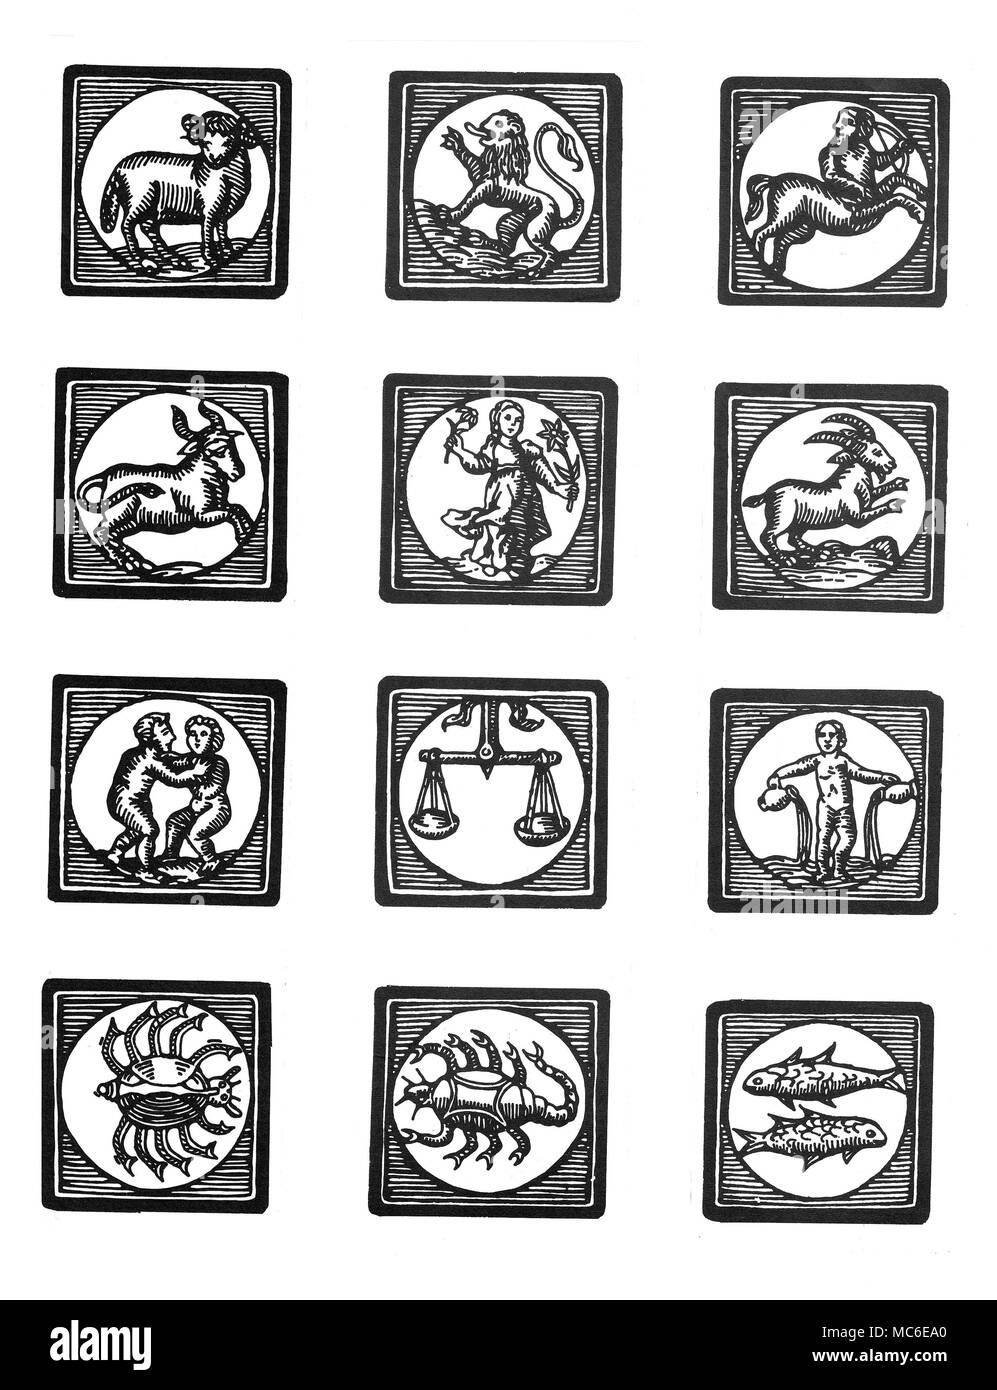 ASTROLOGY Twelve cartouches with the images of the zodiacal signs, from Aries to Pisces. Nineteenth century, Stock Photo